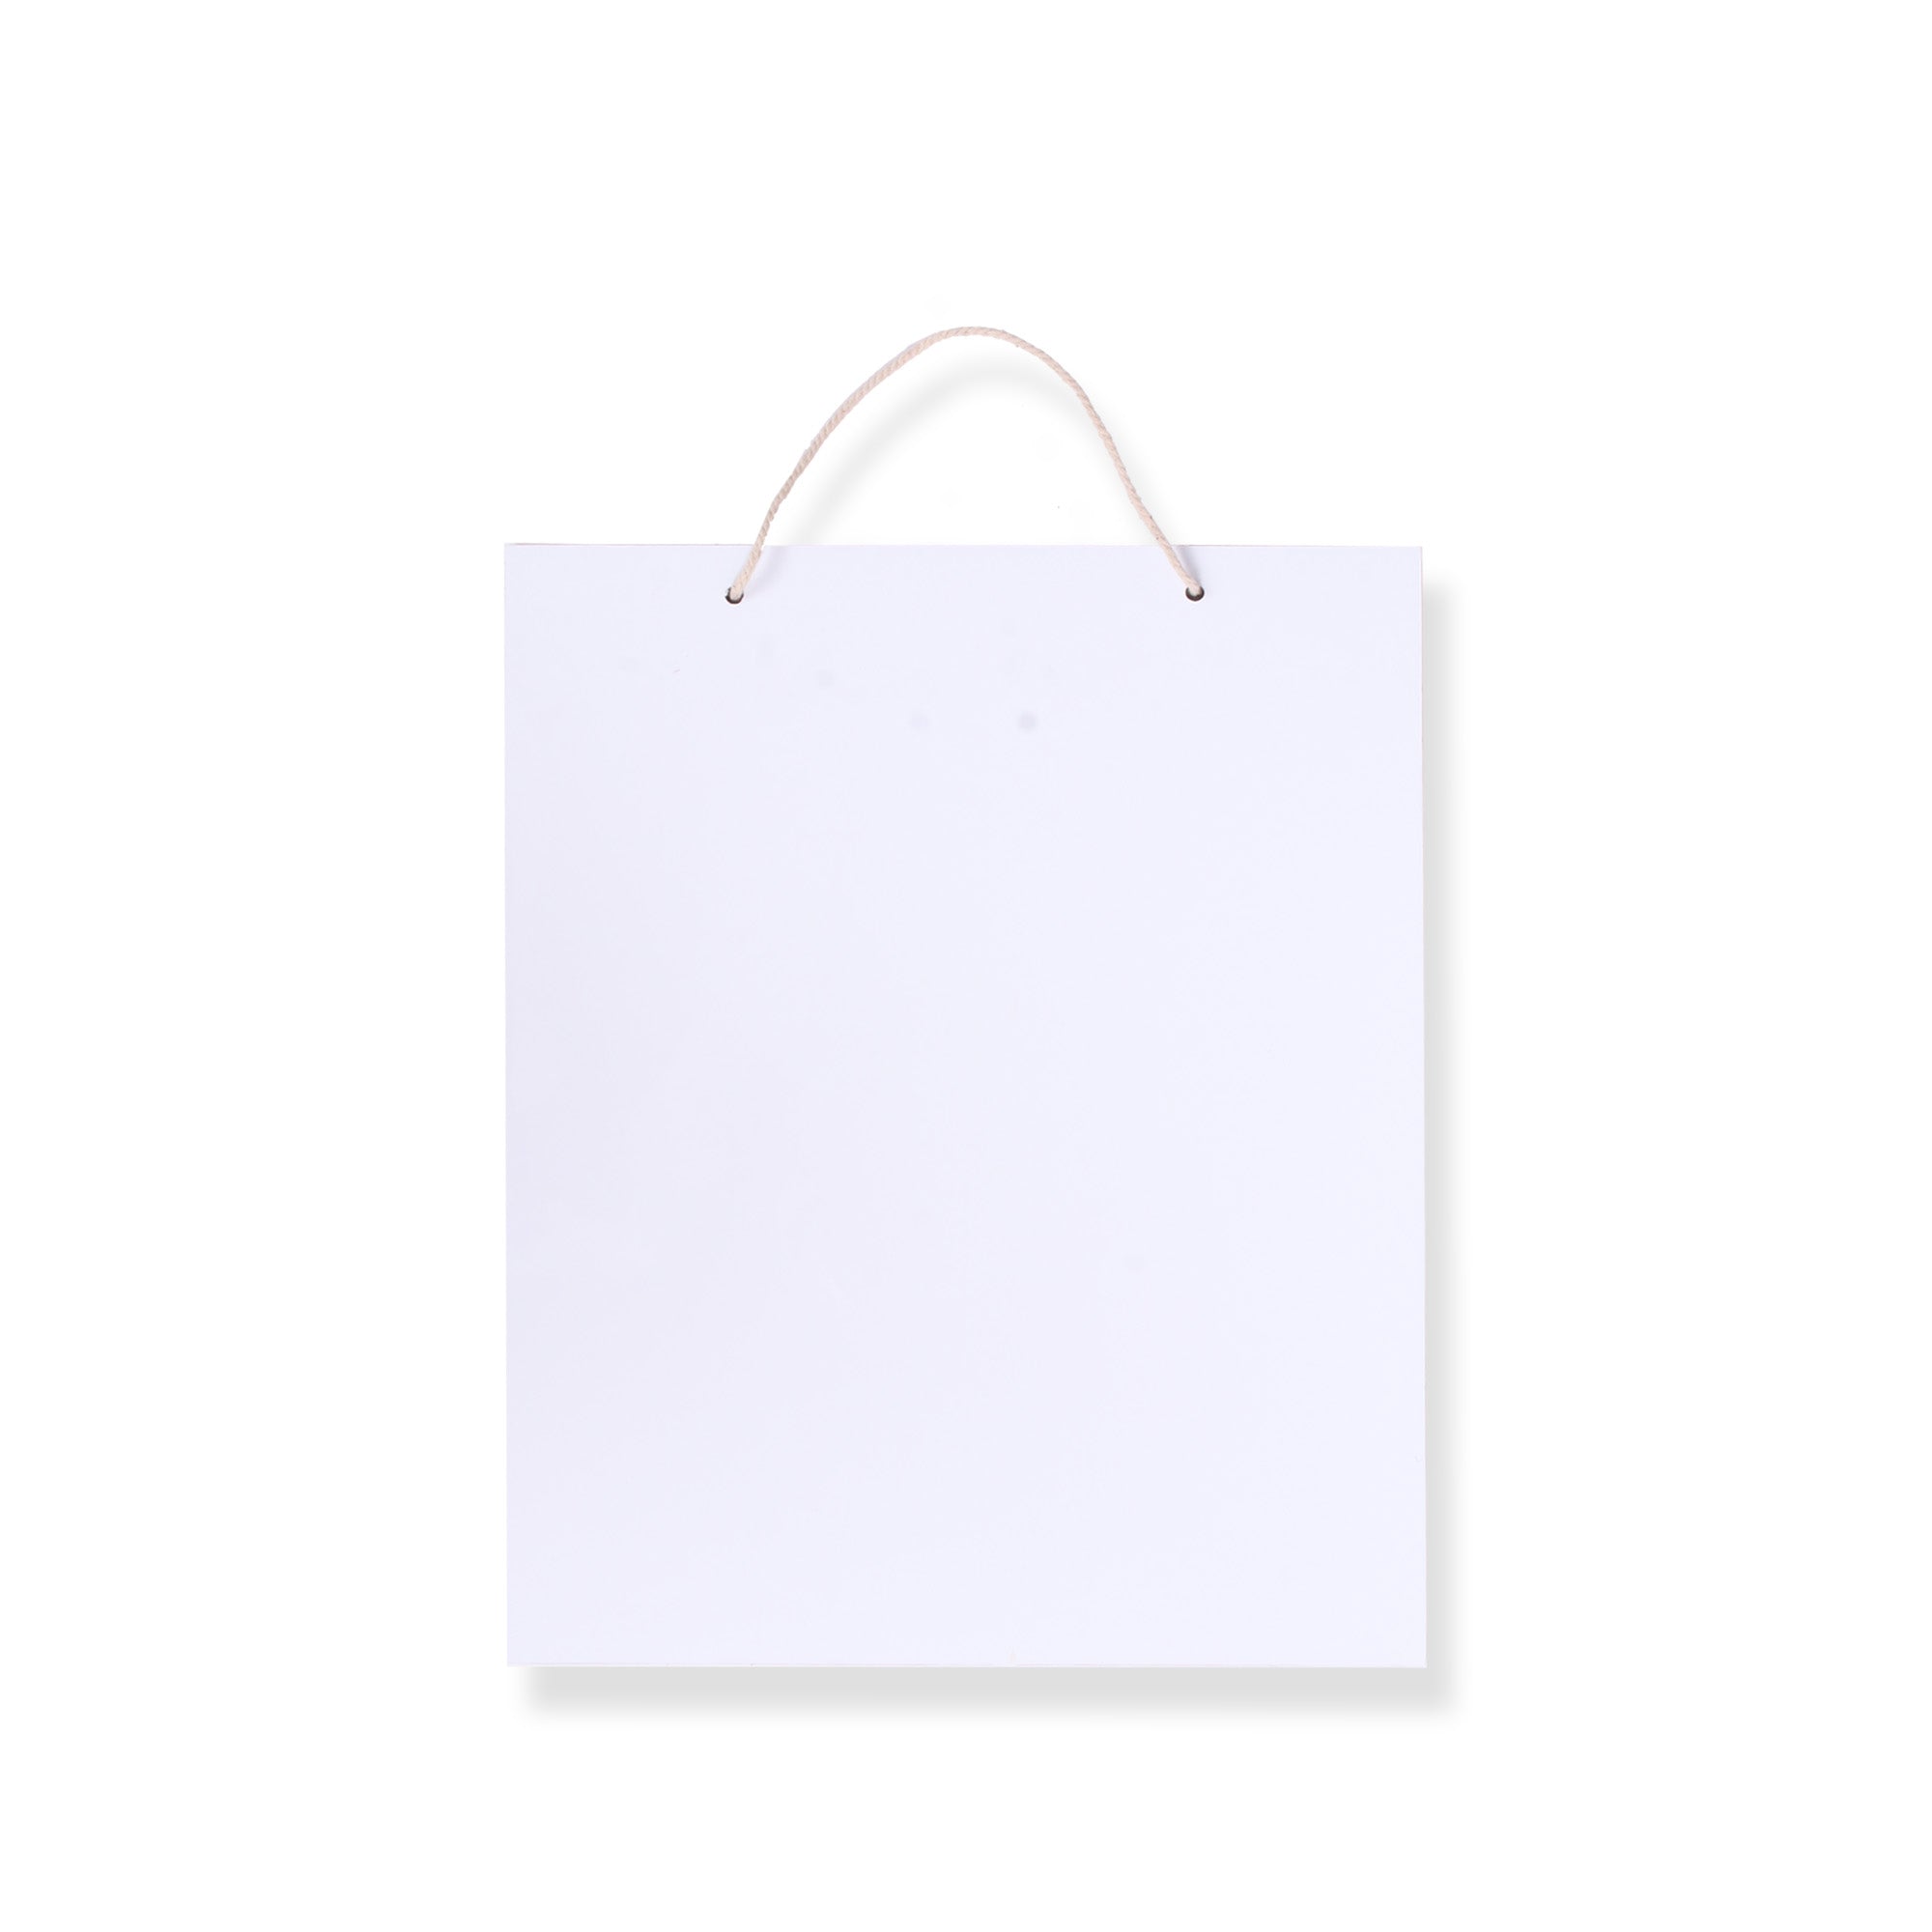 Creative Hanging White Marker Board Portrait Rectangular W8 X H10Inch 5.5Mm Thick 1Pc Lb